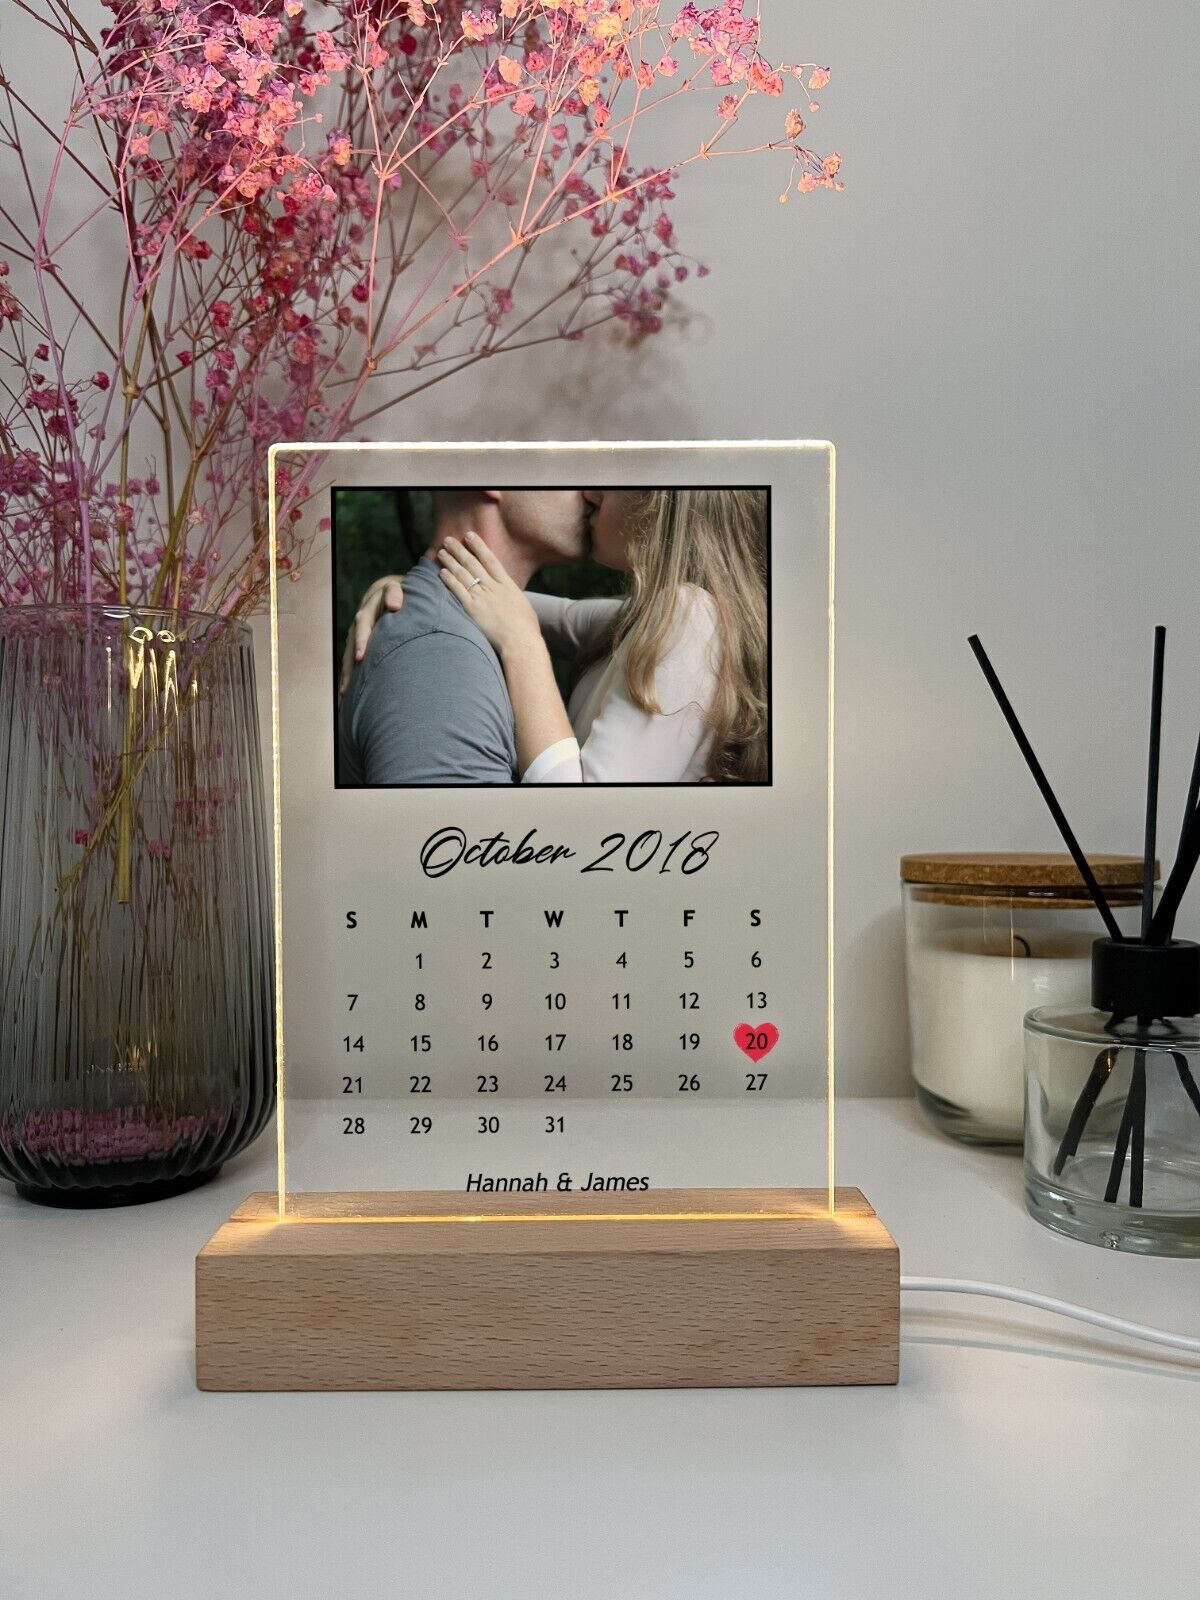 Personalized LED Light Up Calendar Couple Anniversary Wedding Holiday Gift